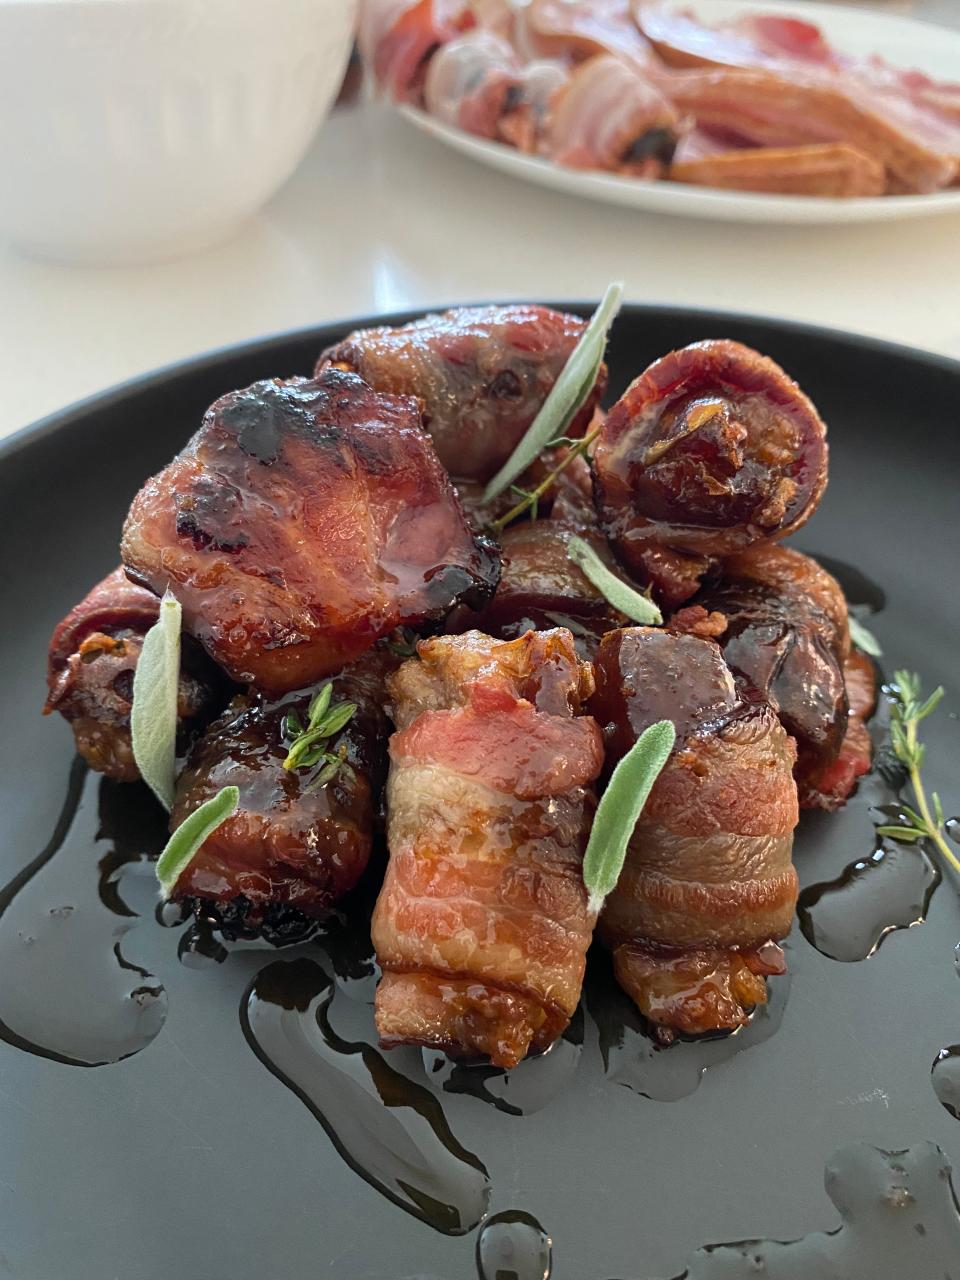 The combination of maple syrup sweet and hints of heat from the It Sauce add depth of flavors to these bacon-wrapped, sausage-stuffed dates.